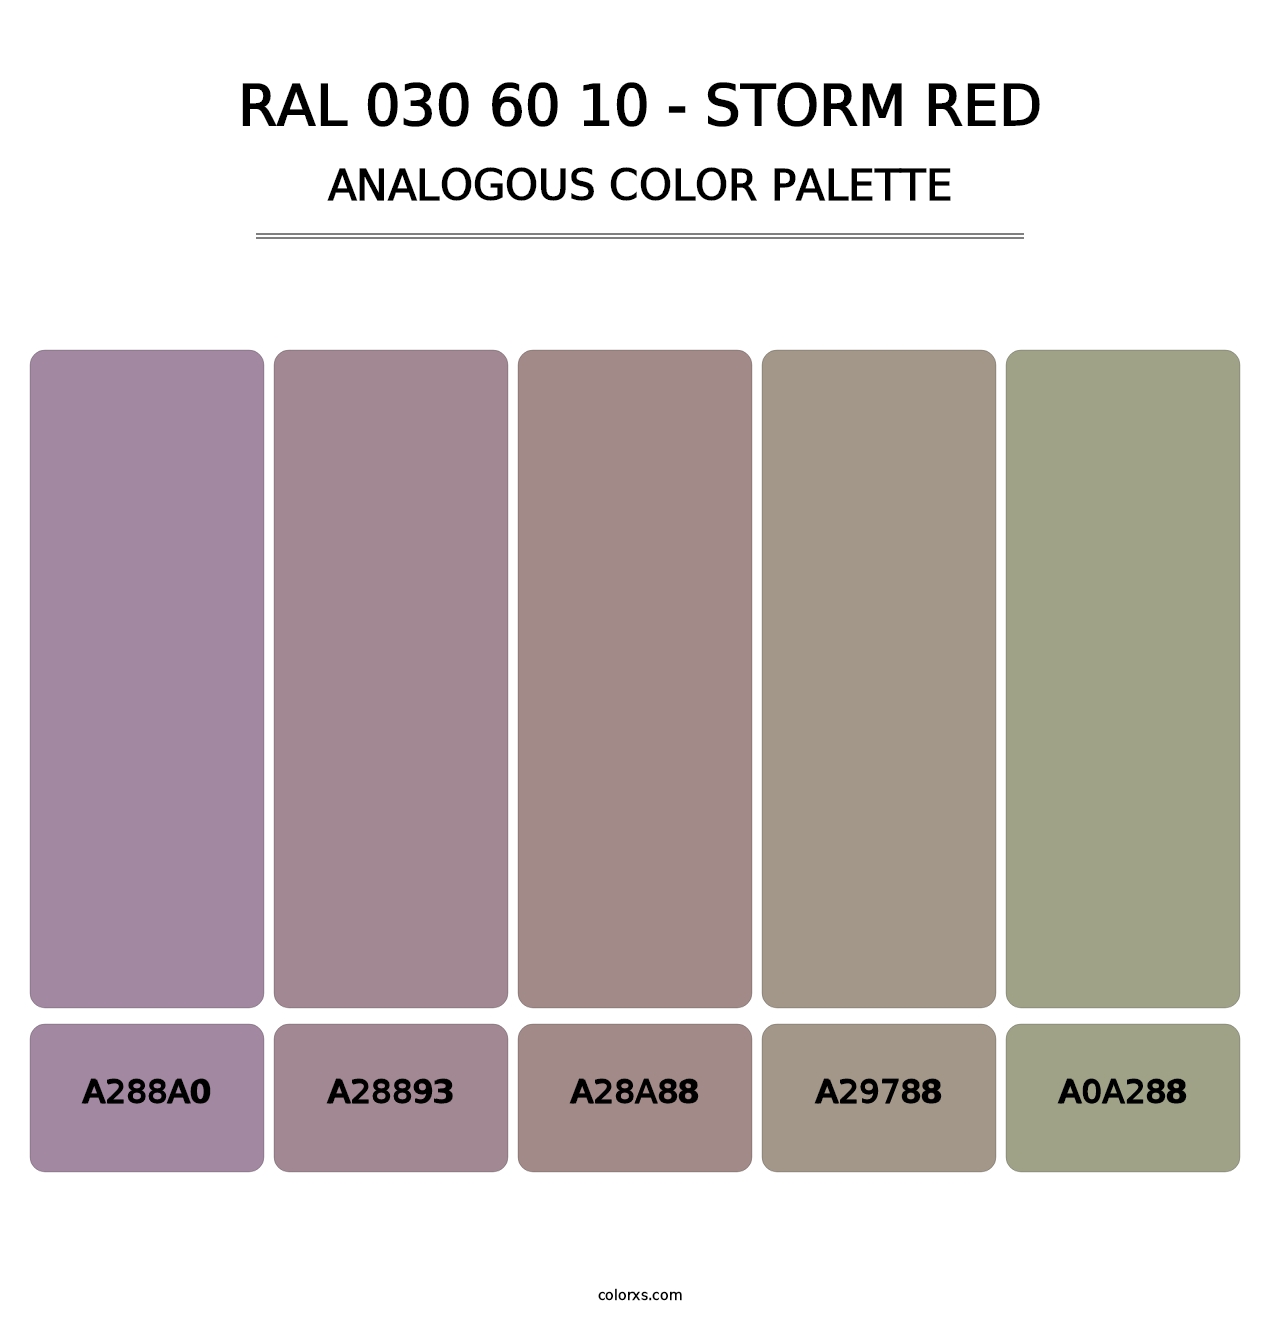 RAL 030 60 10 - Storm Red - Analogous Color Palette